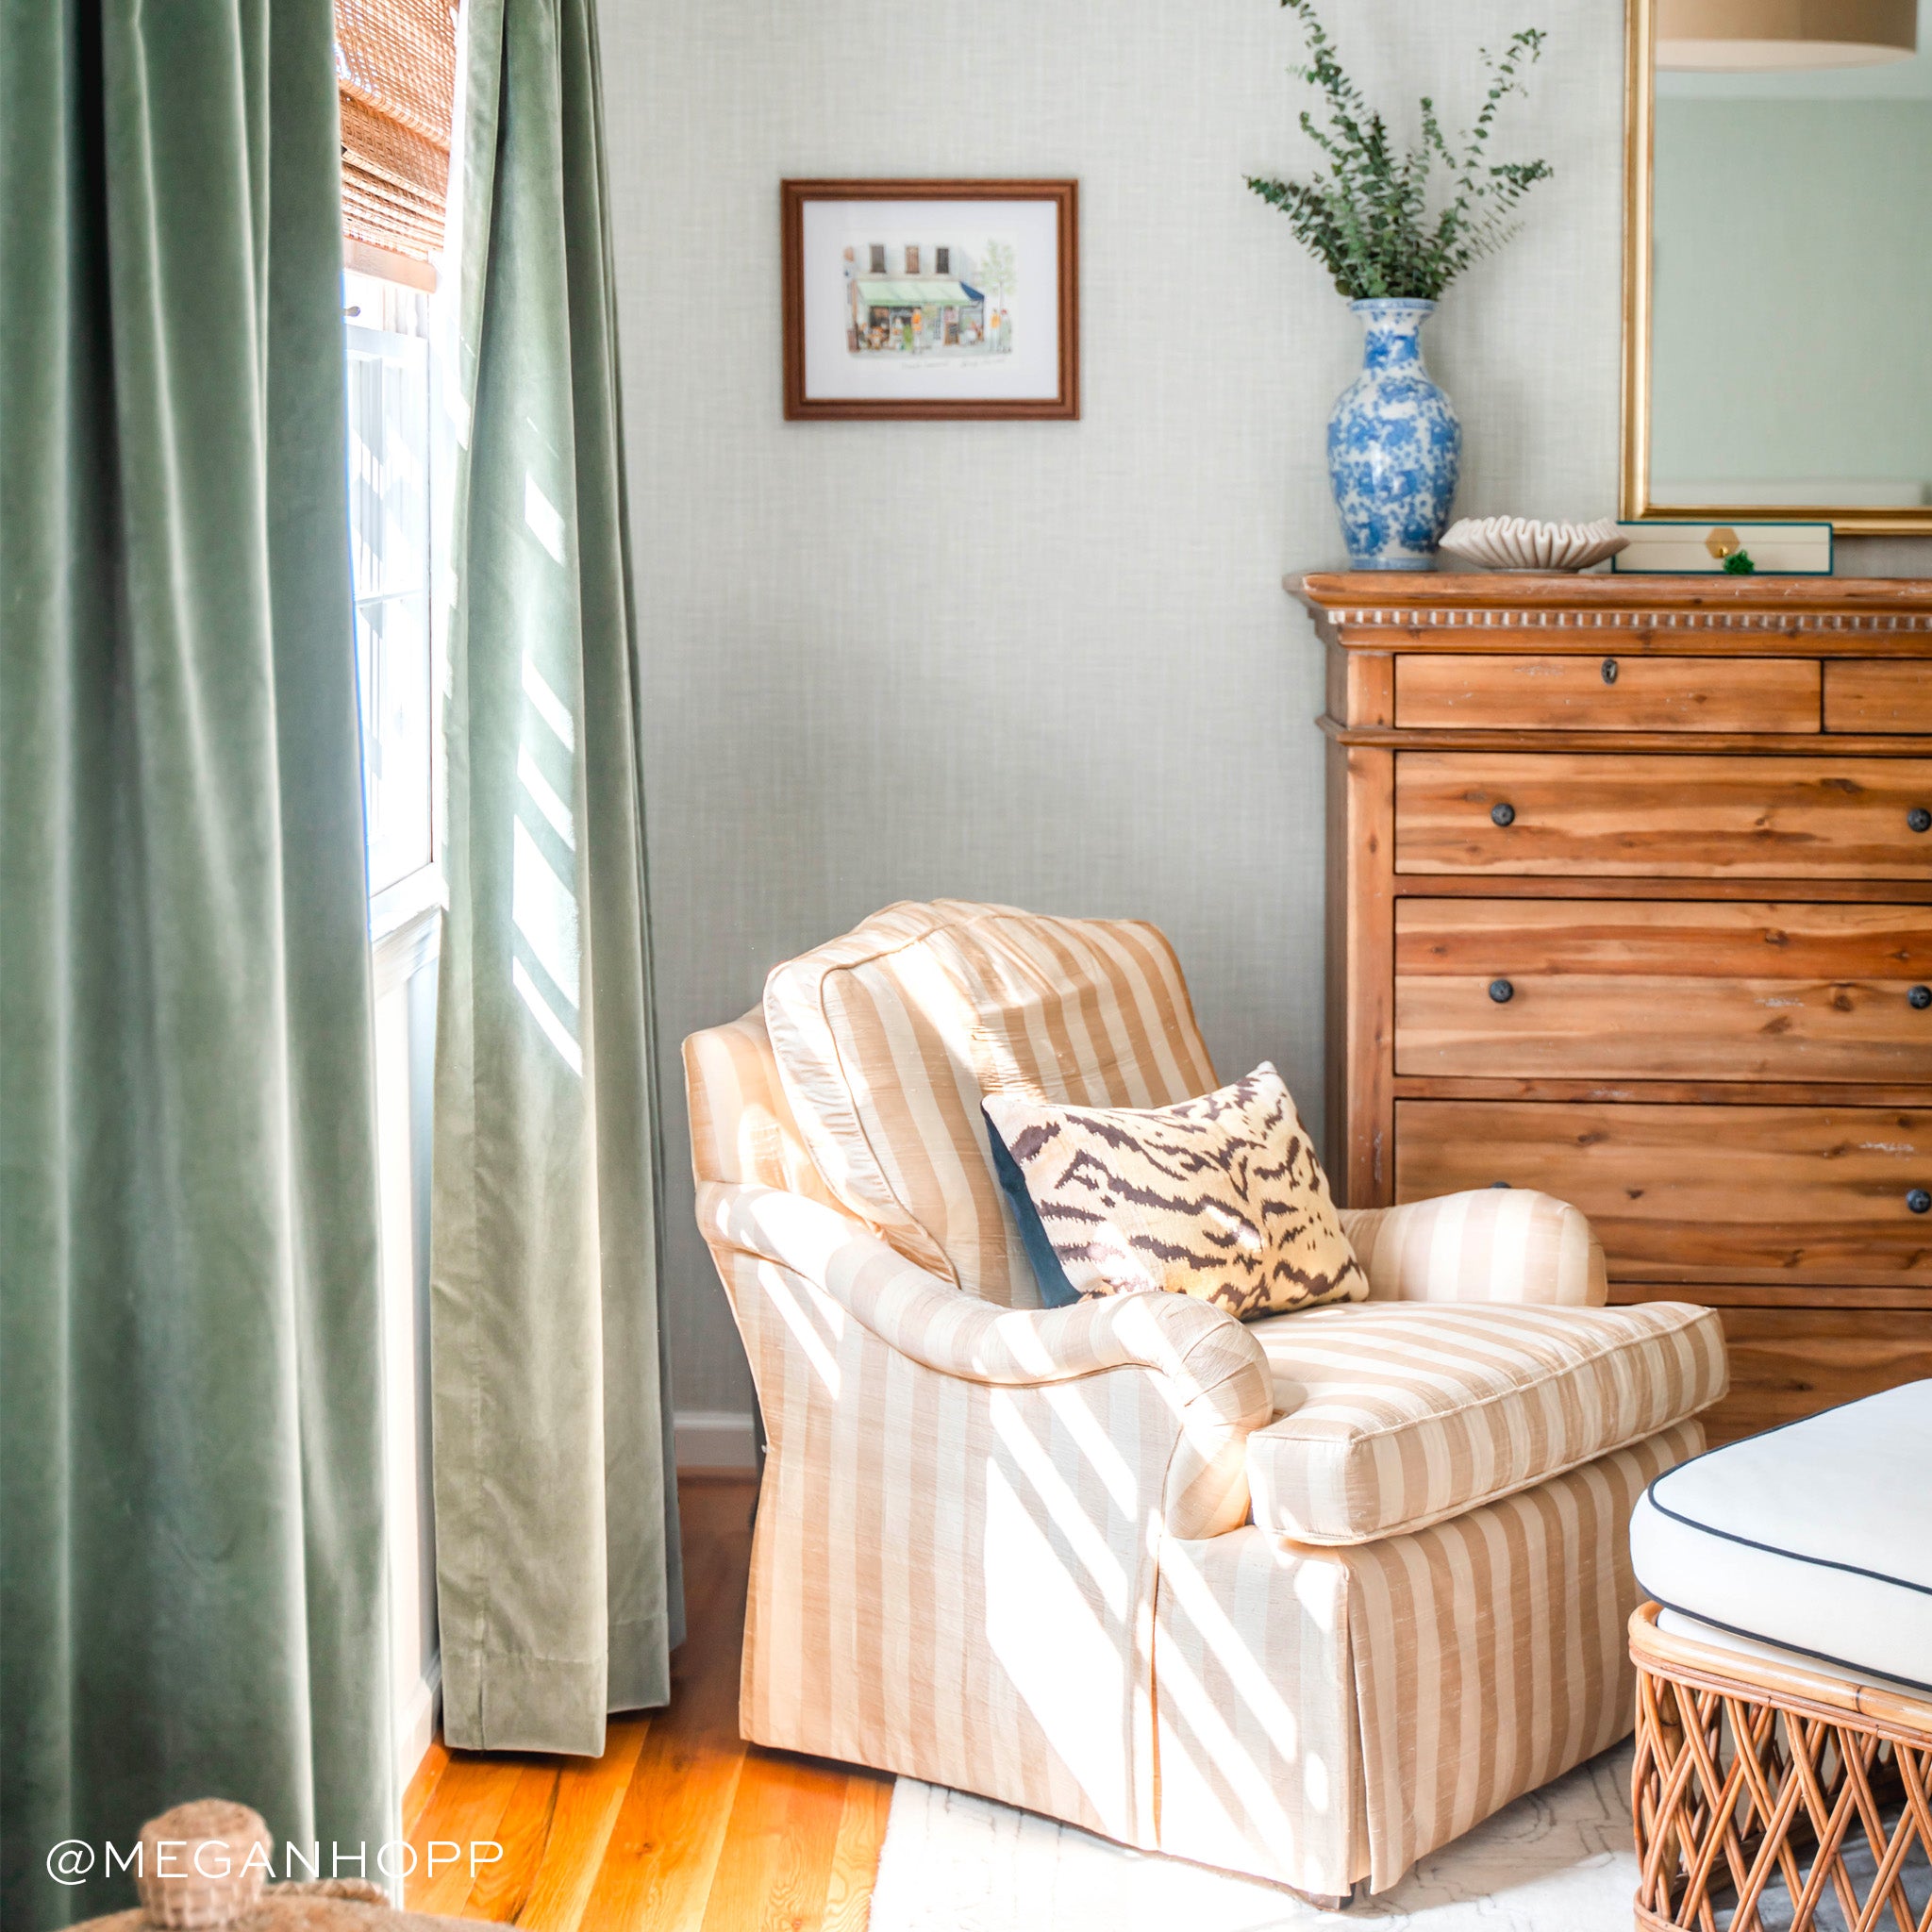 Corner styled with Fern Green Velvet Curtains next to striped couch with zebra printed pillow next to wooden dresser and plants in blue and white vase on top. Photo taken by Megan Hopp